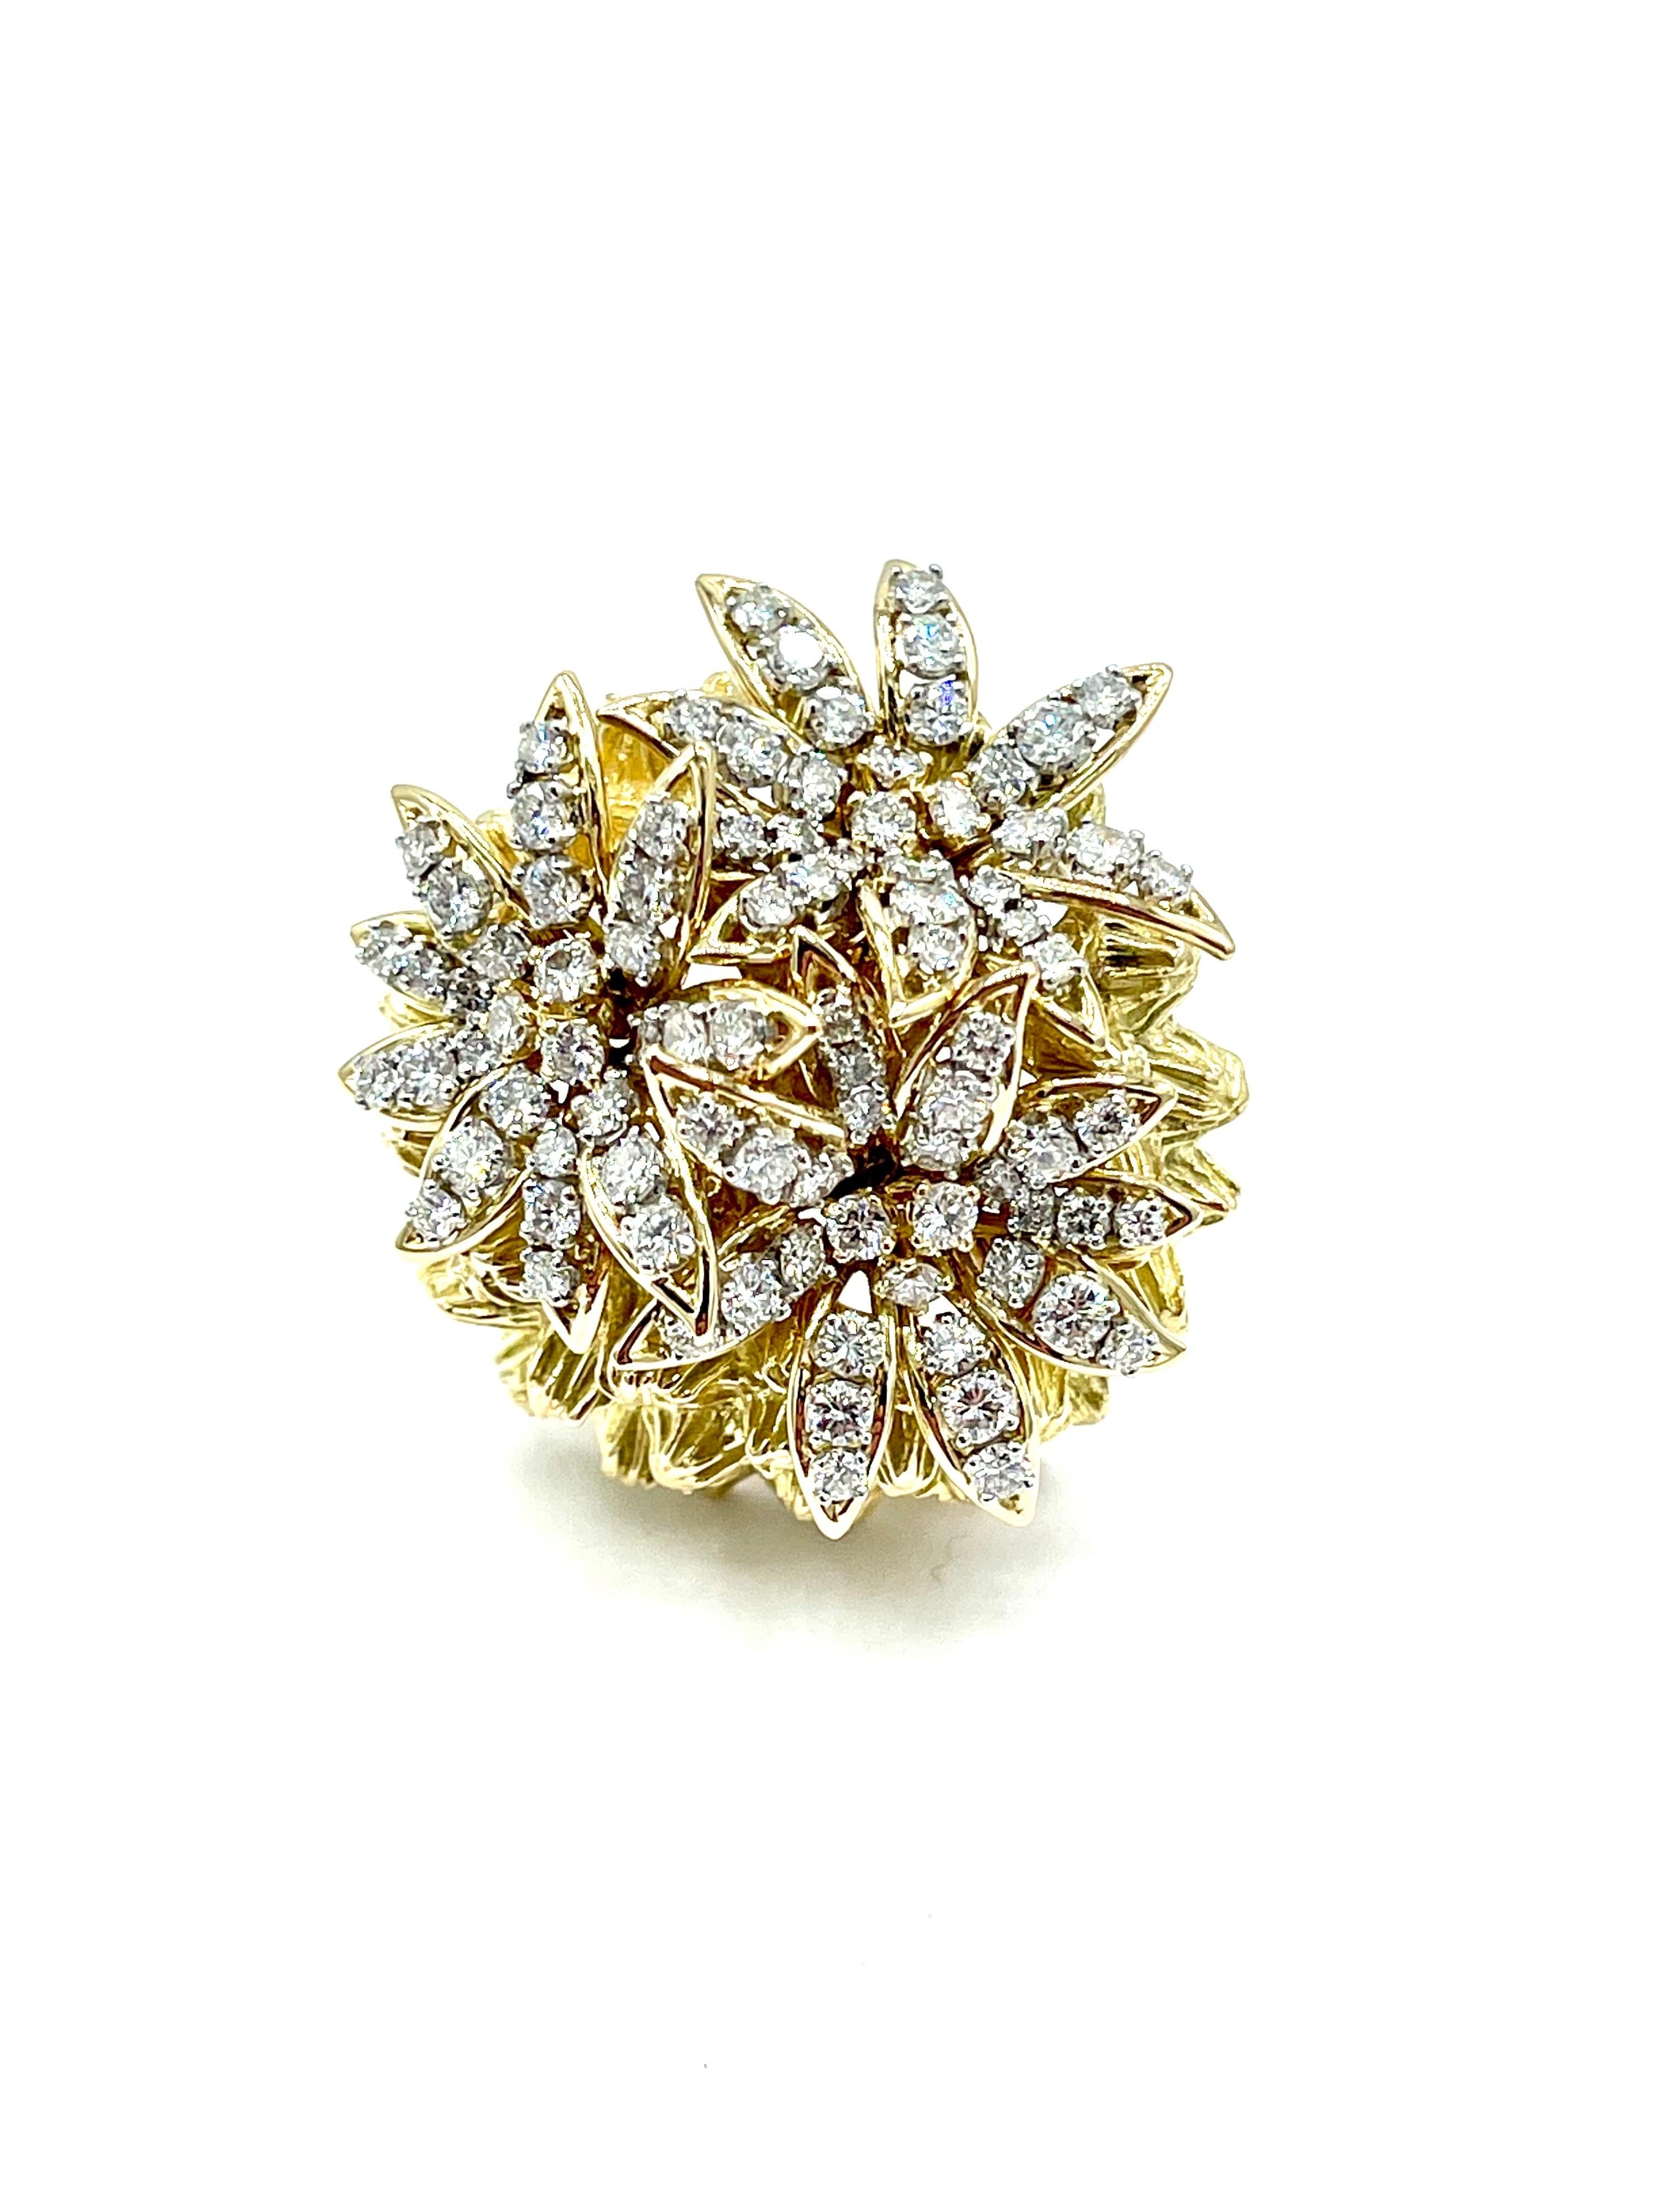 A beautiful French made Diamond and 18K yellow gold brooch!  The brooch is made with three round brilliant Diamond flowers sitting atop a detailed textured dome of 18K yellow gold.  The Diamonds have a total weight of 2.60 carats.  The brooch